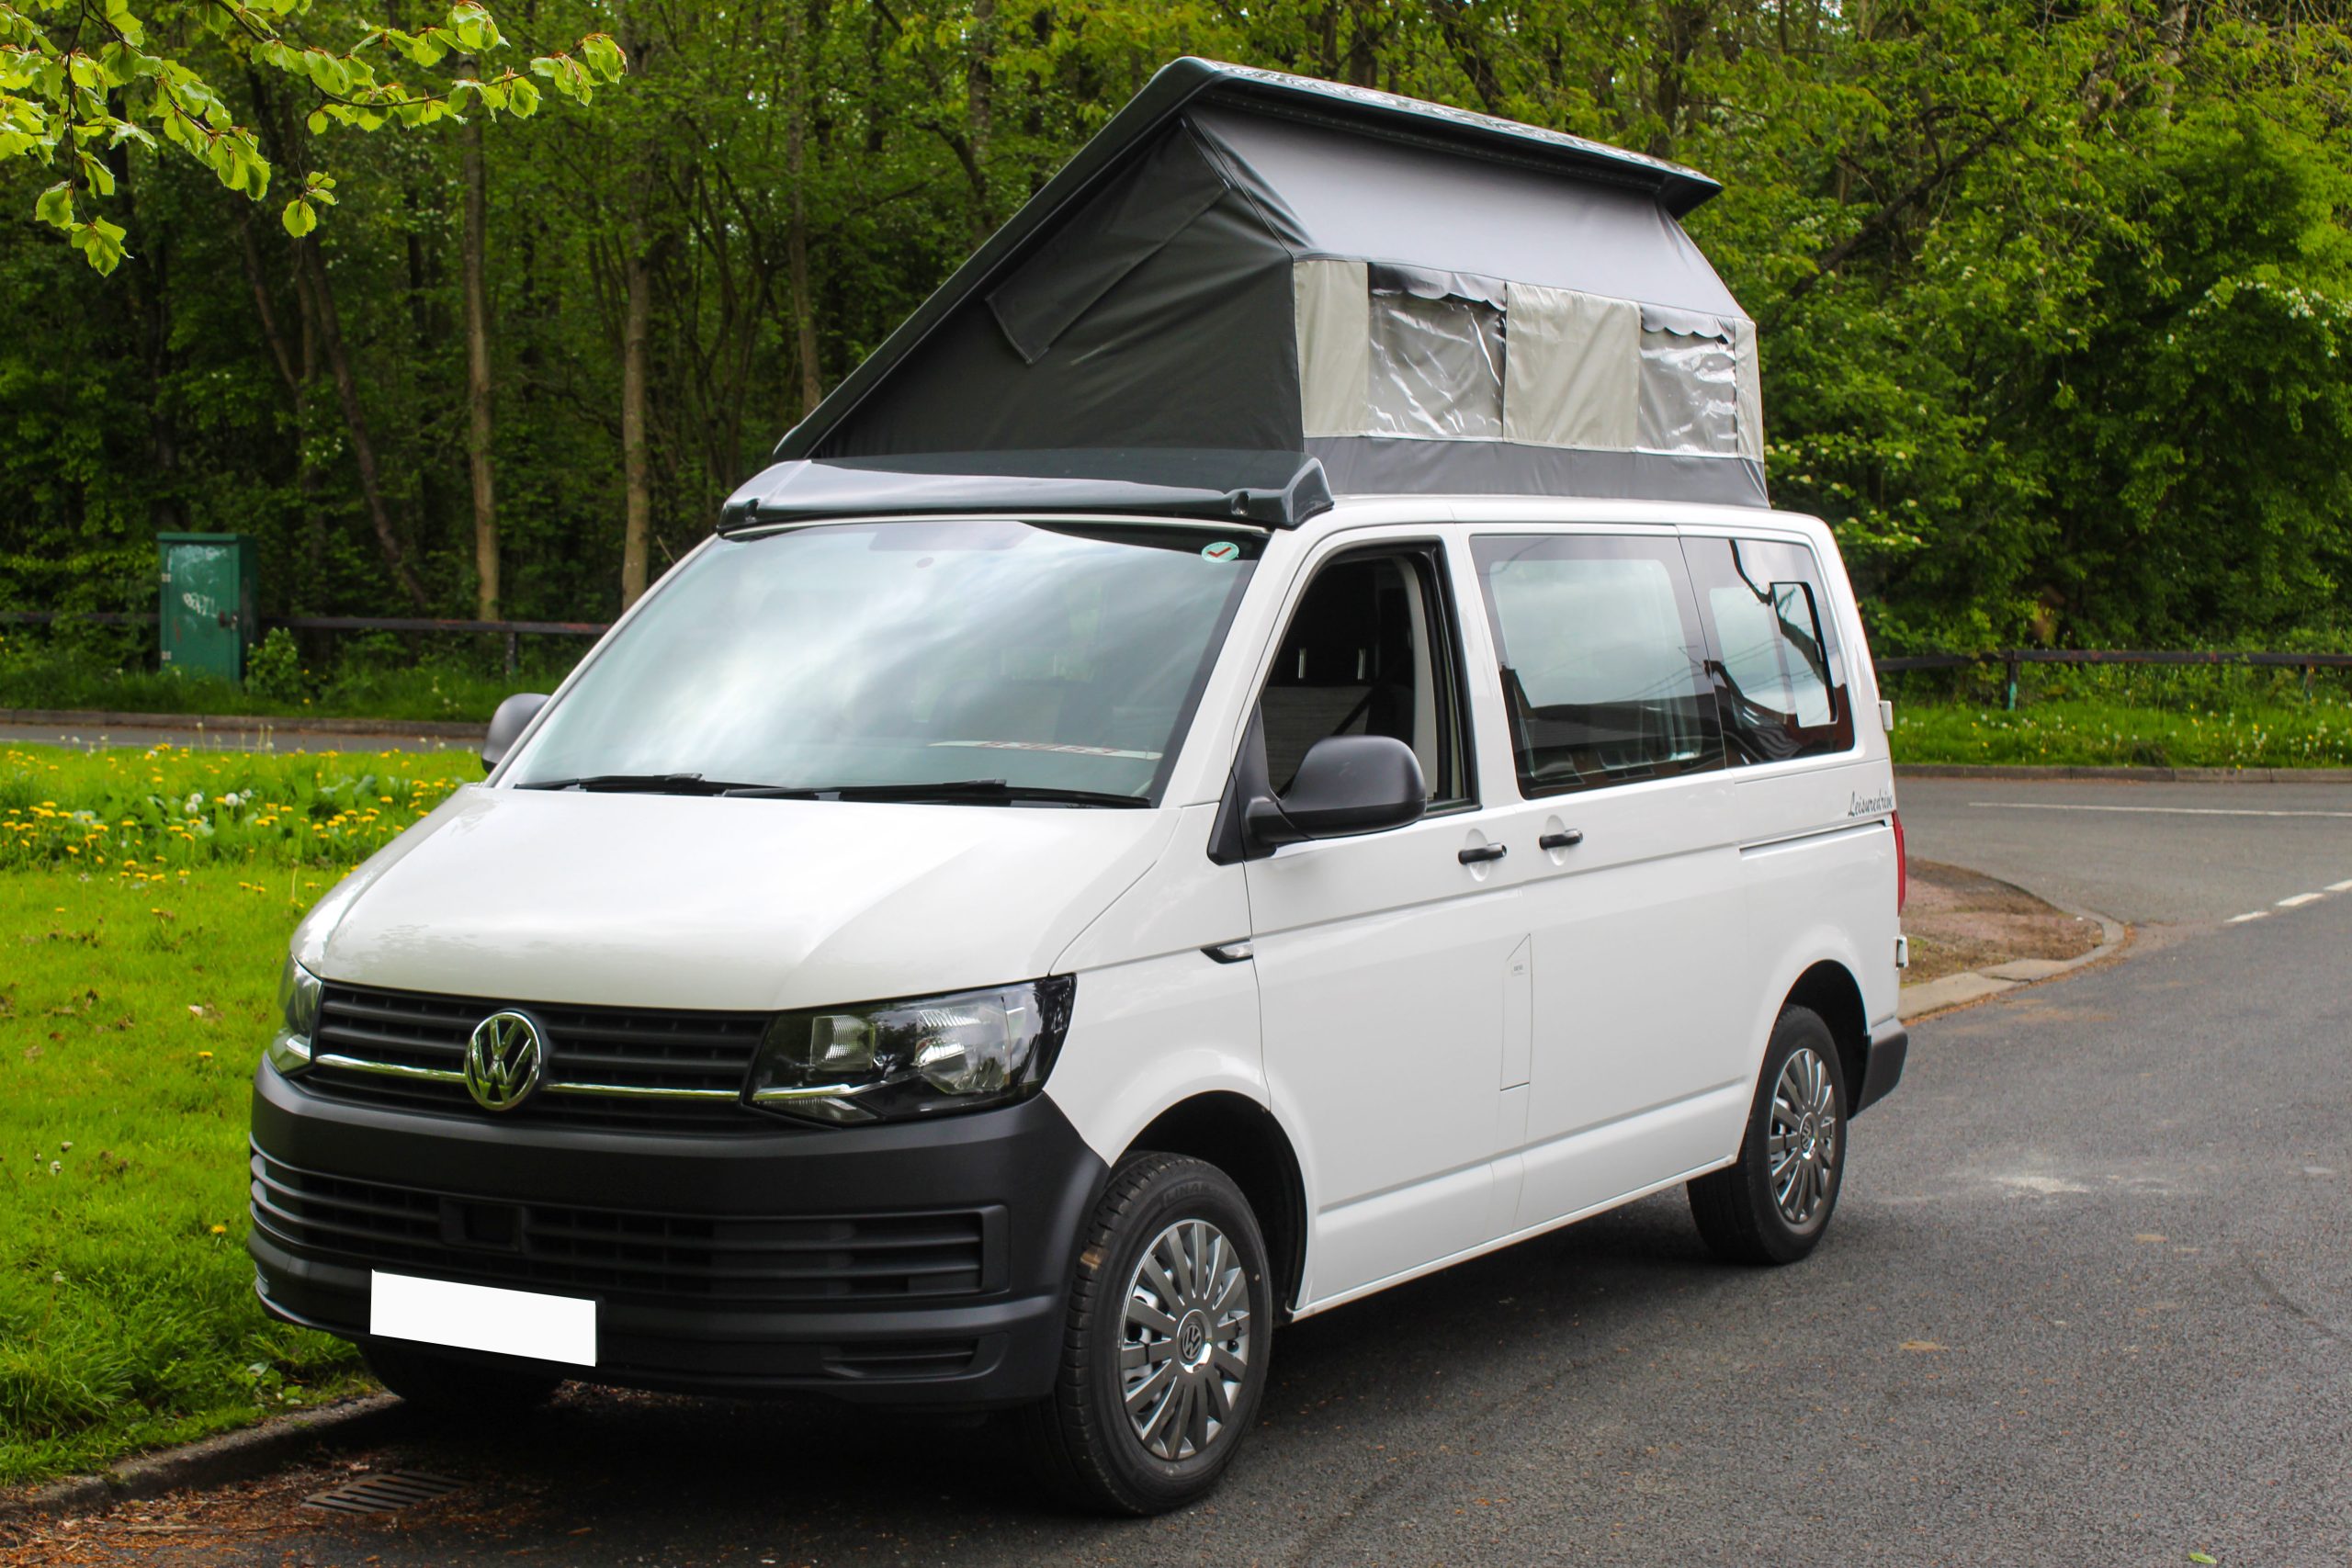 DVLA and Rules of Owning a Campervan Compliant with V5 document